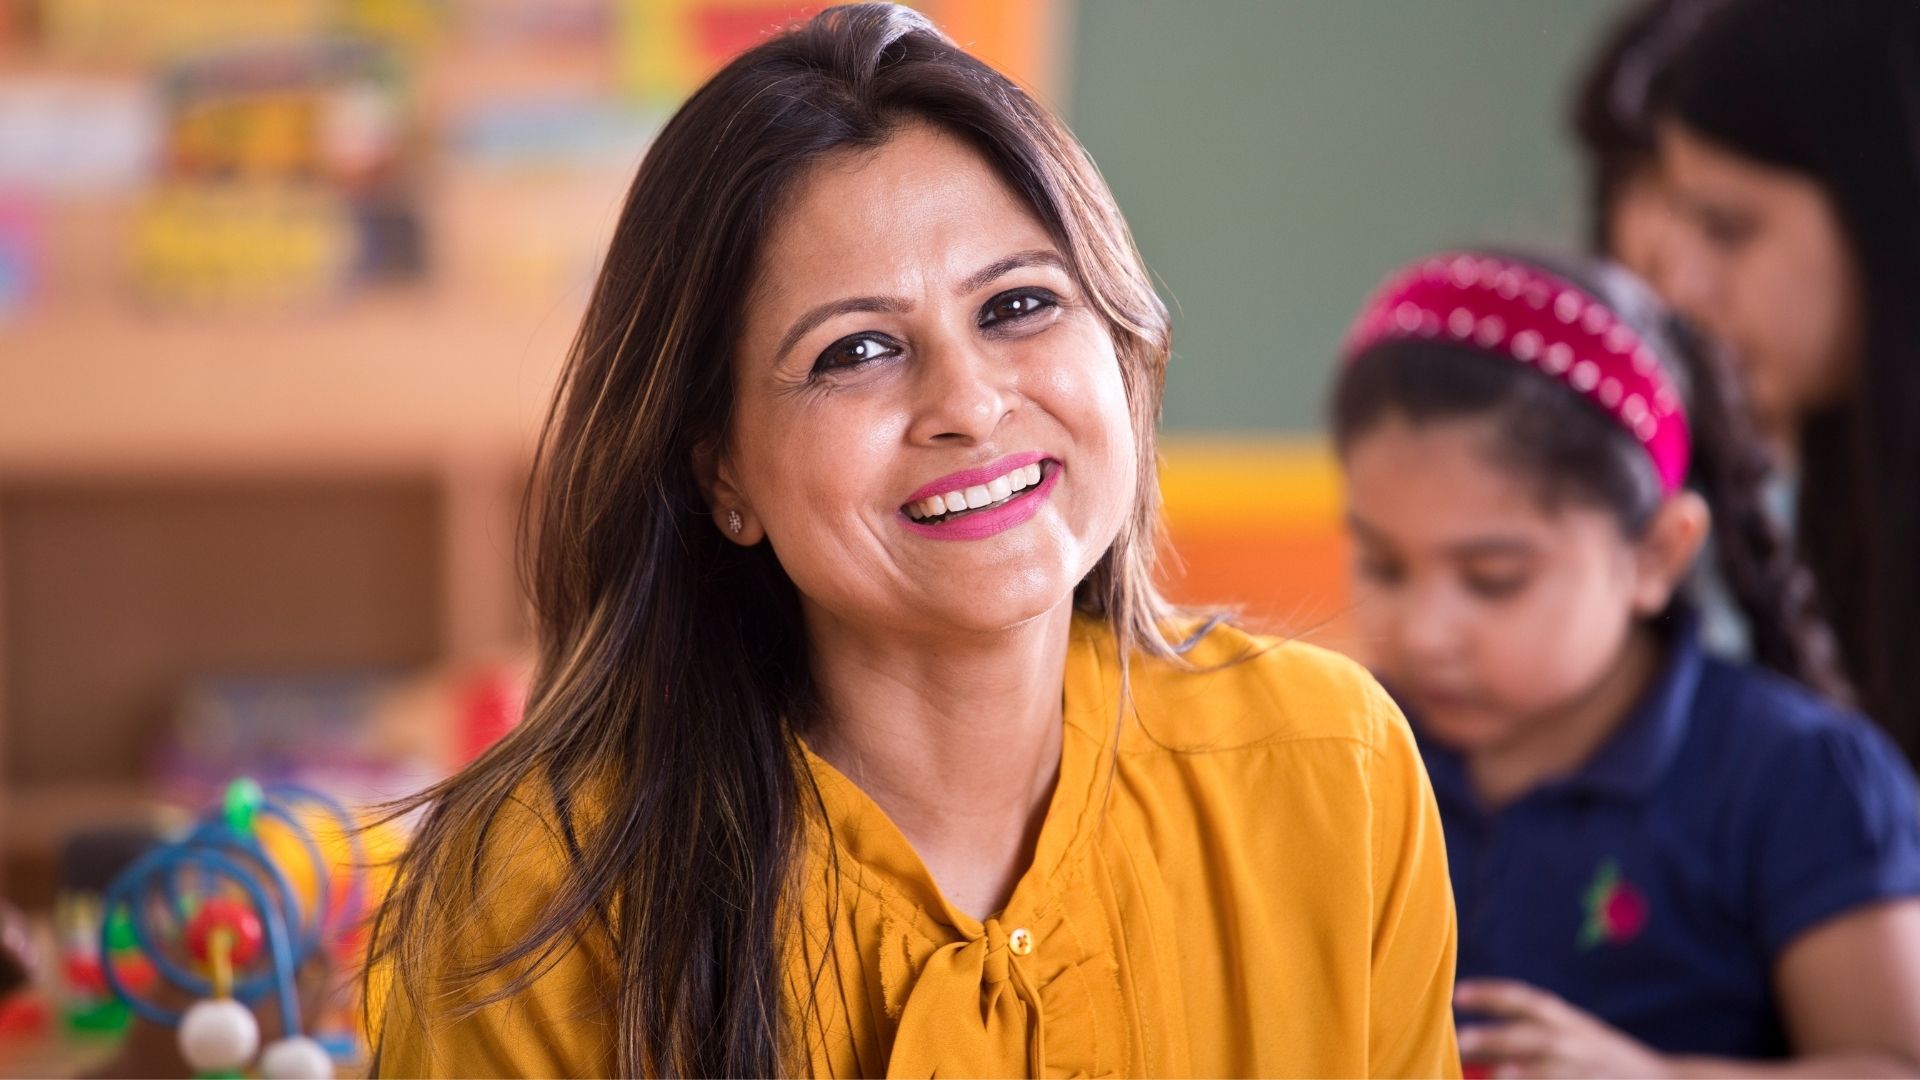 An image of a female teacher smiling at the camera in her classroom.